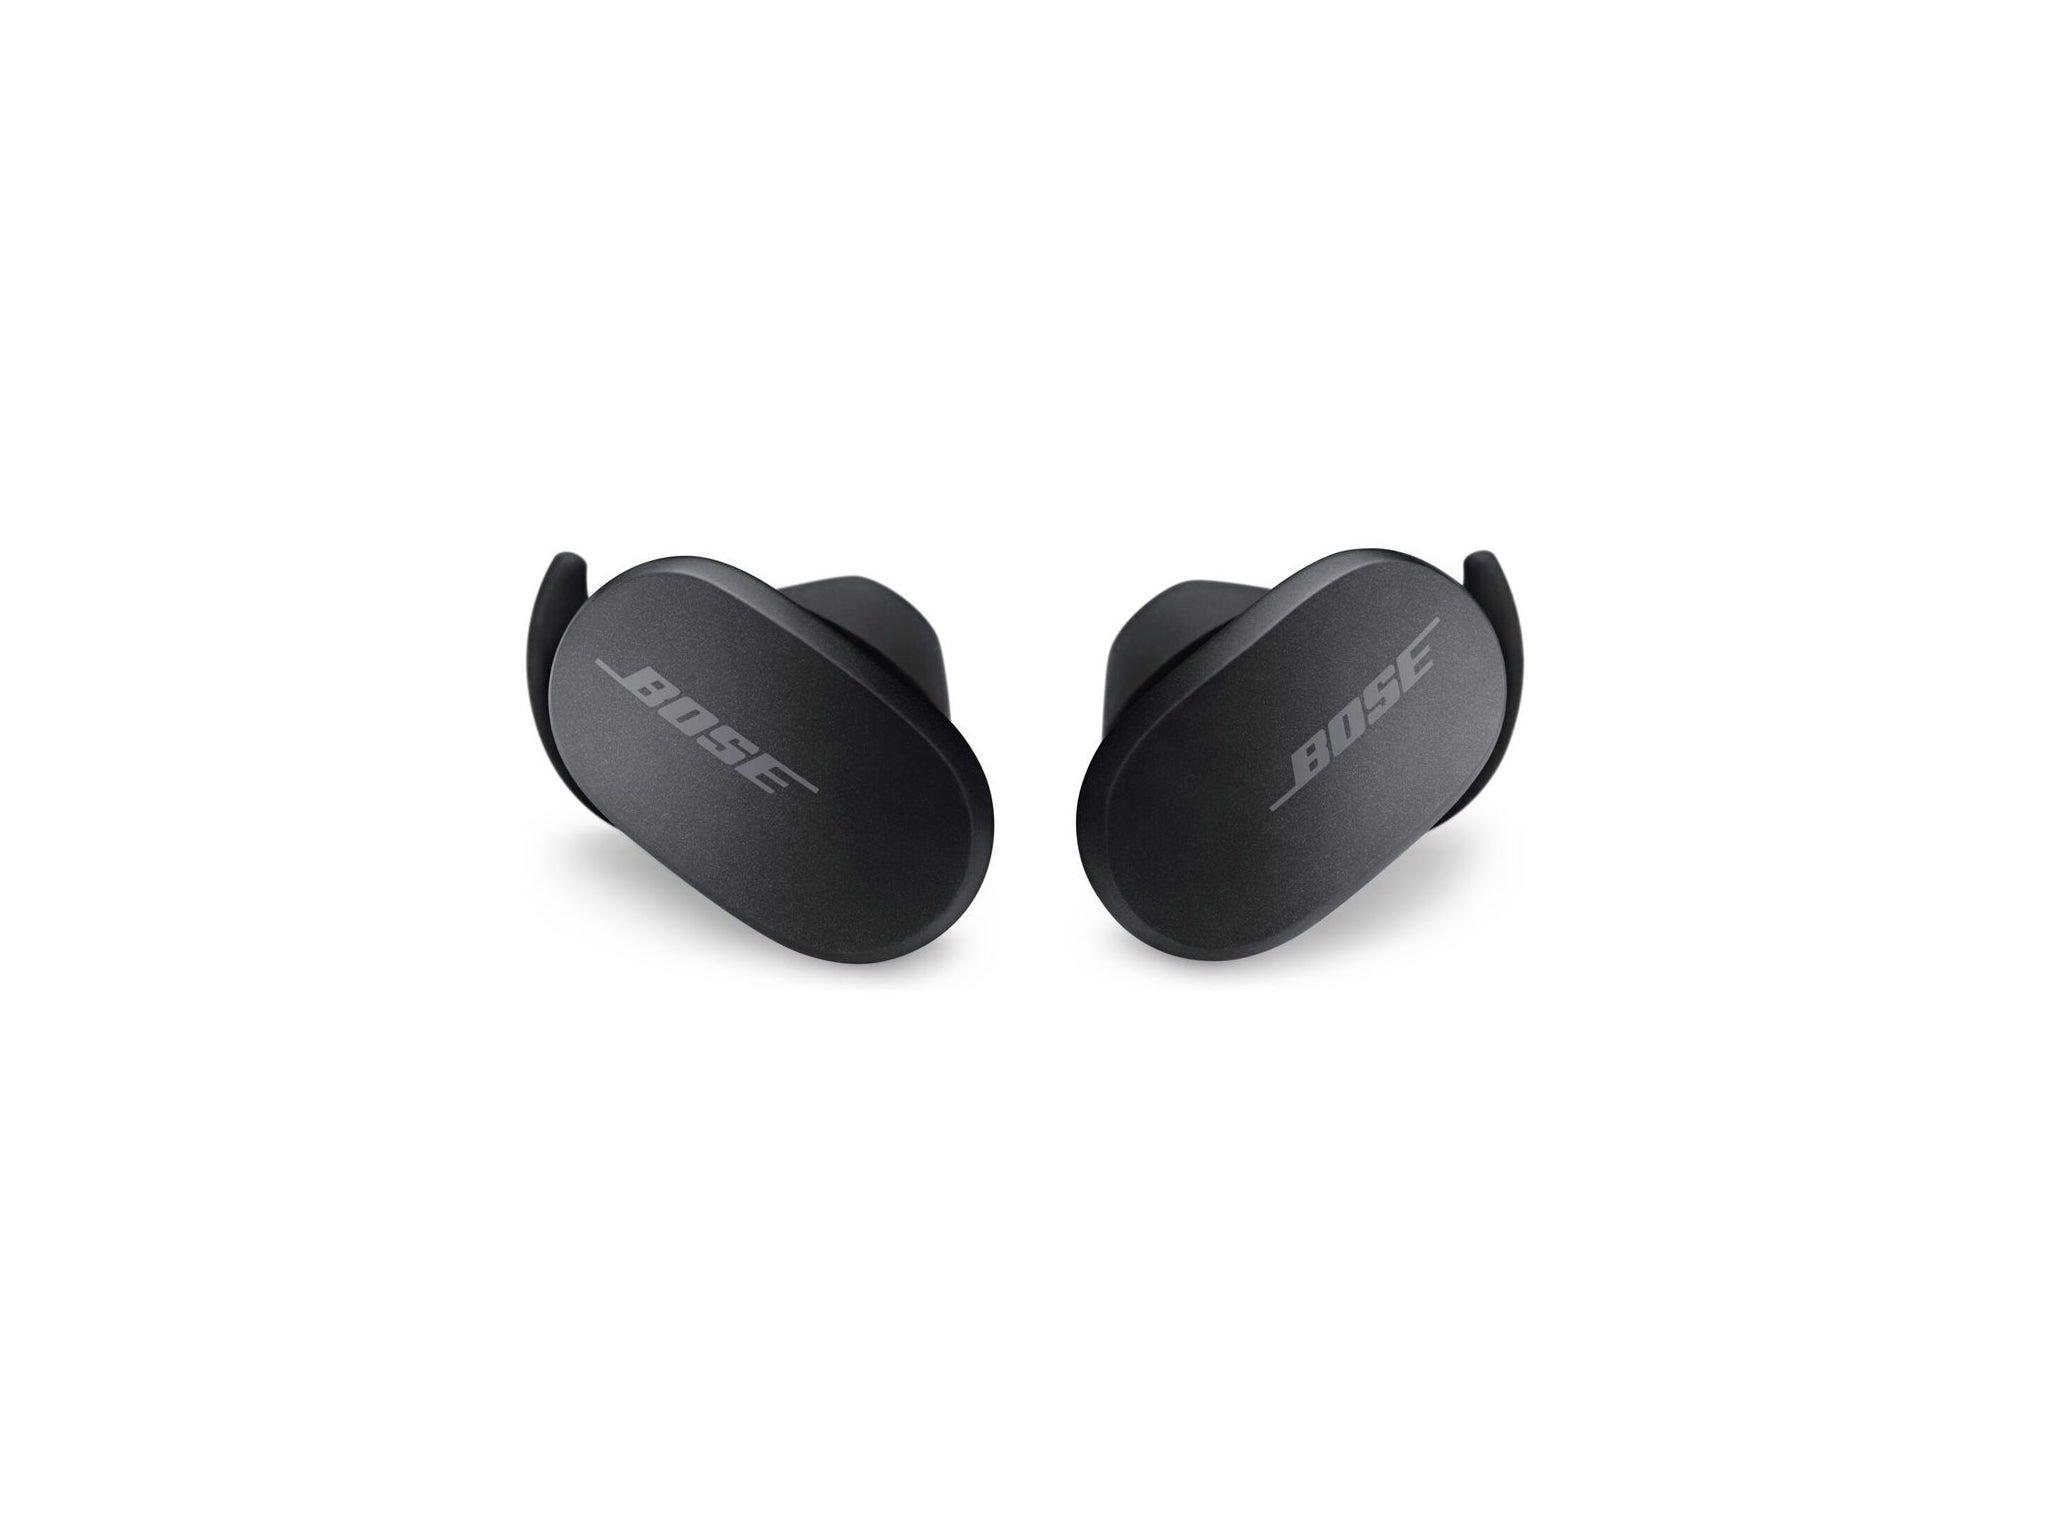 Bose QuietComfort wireless bluetooth noise-cancelling earbuds